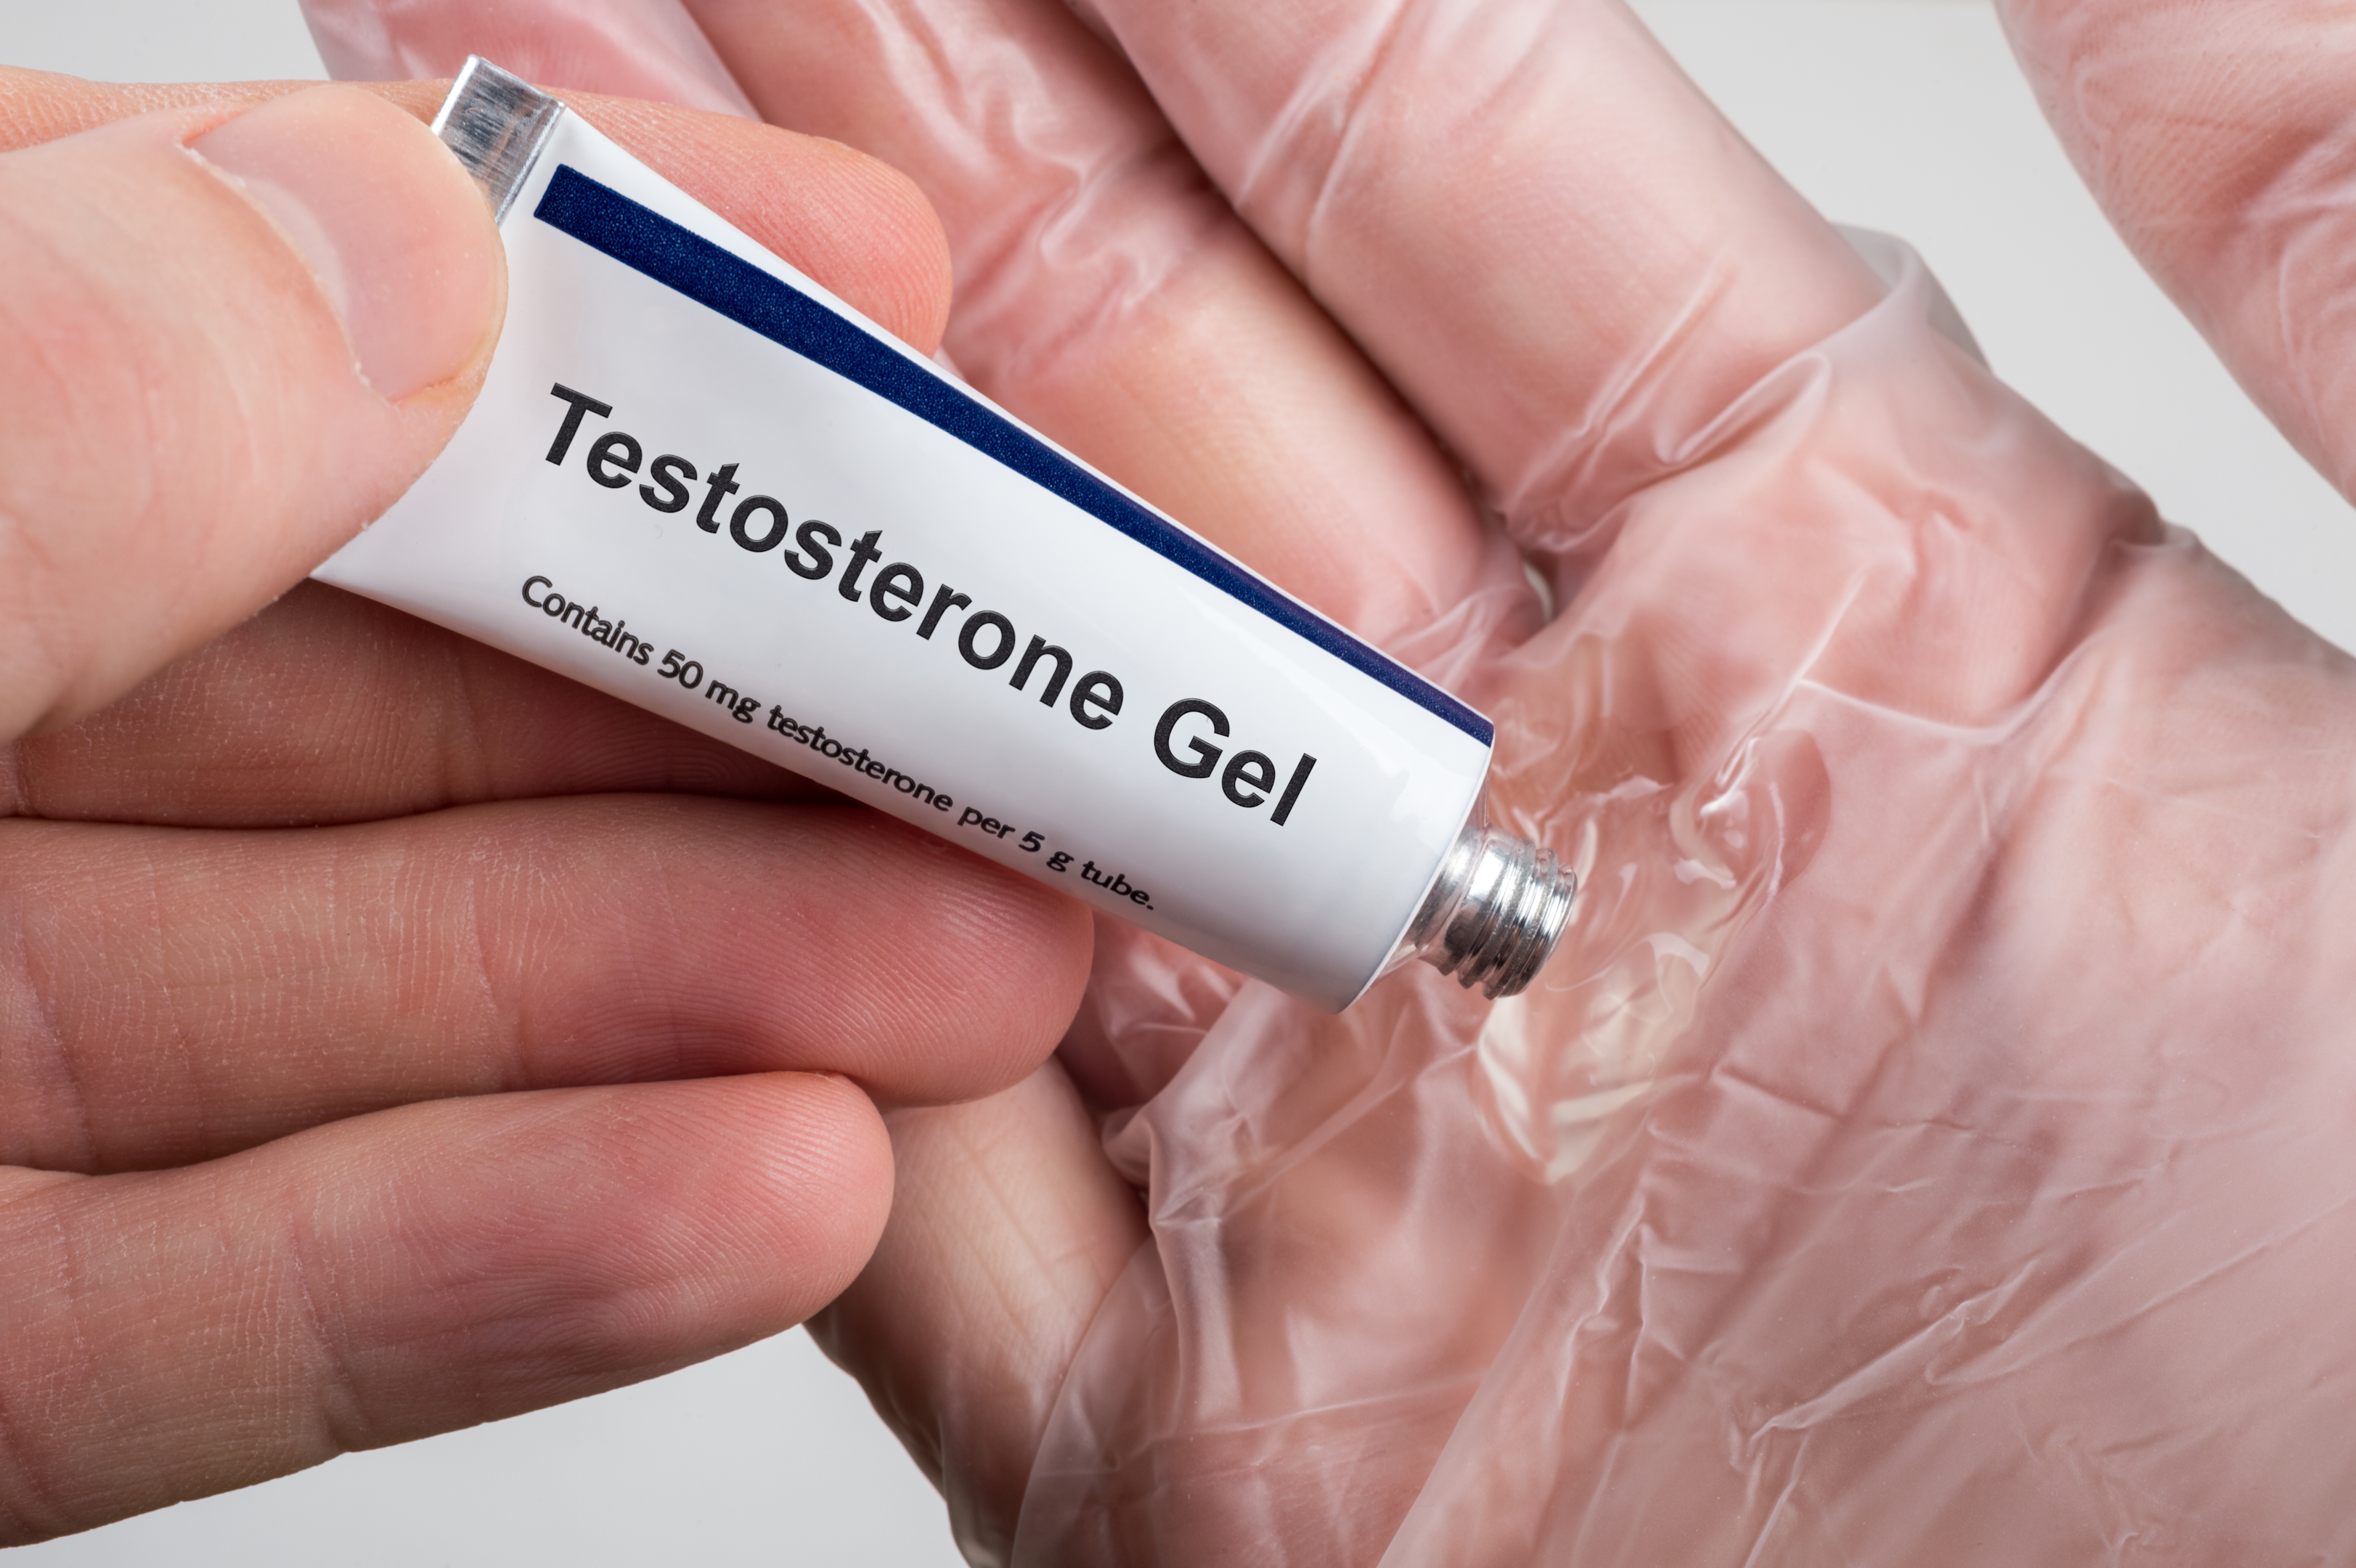 Caucasian hand holding a tube marked as "testosterone gel", squeezing it into the palm of the other hand 